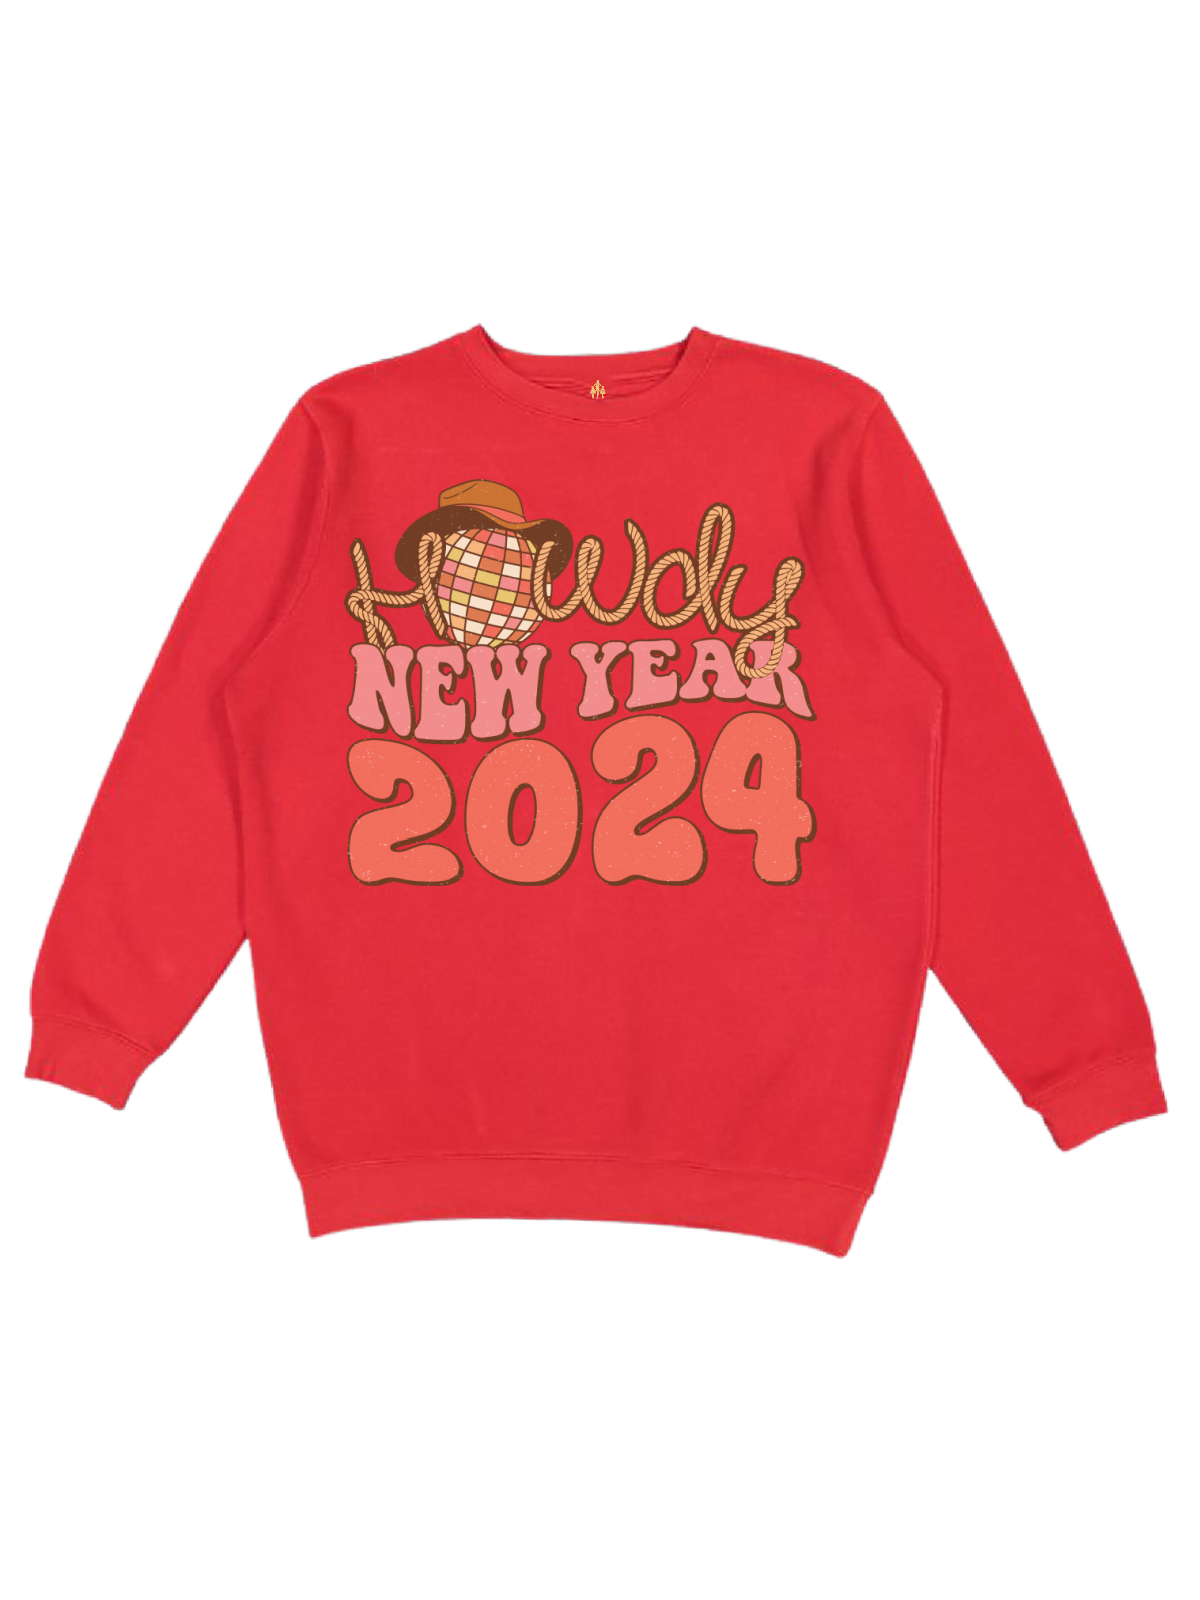 Howdy New Year 2024 Adult Shirt in Red